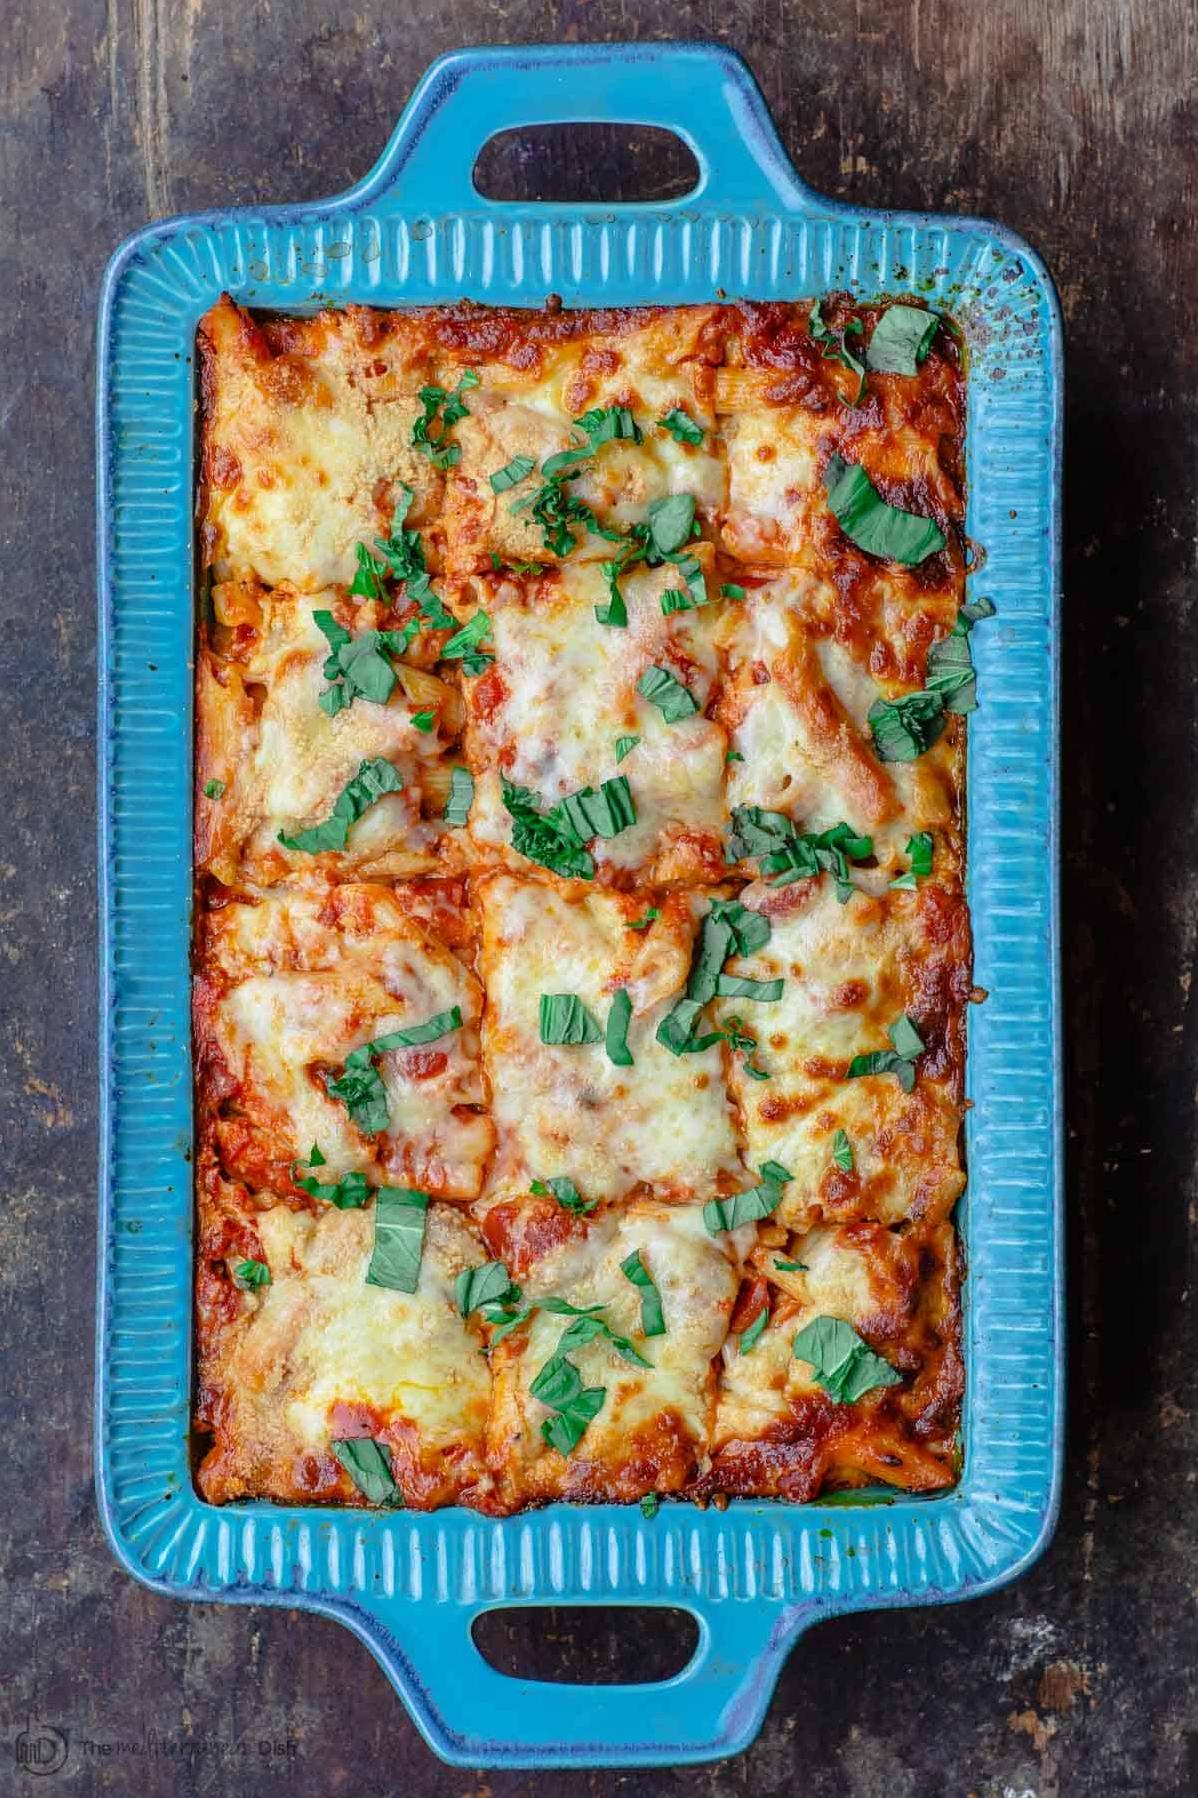  You can use any kind of pasta that strikes your fancy for this vegetarian baked ziti recipe.